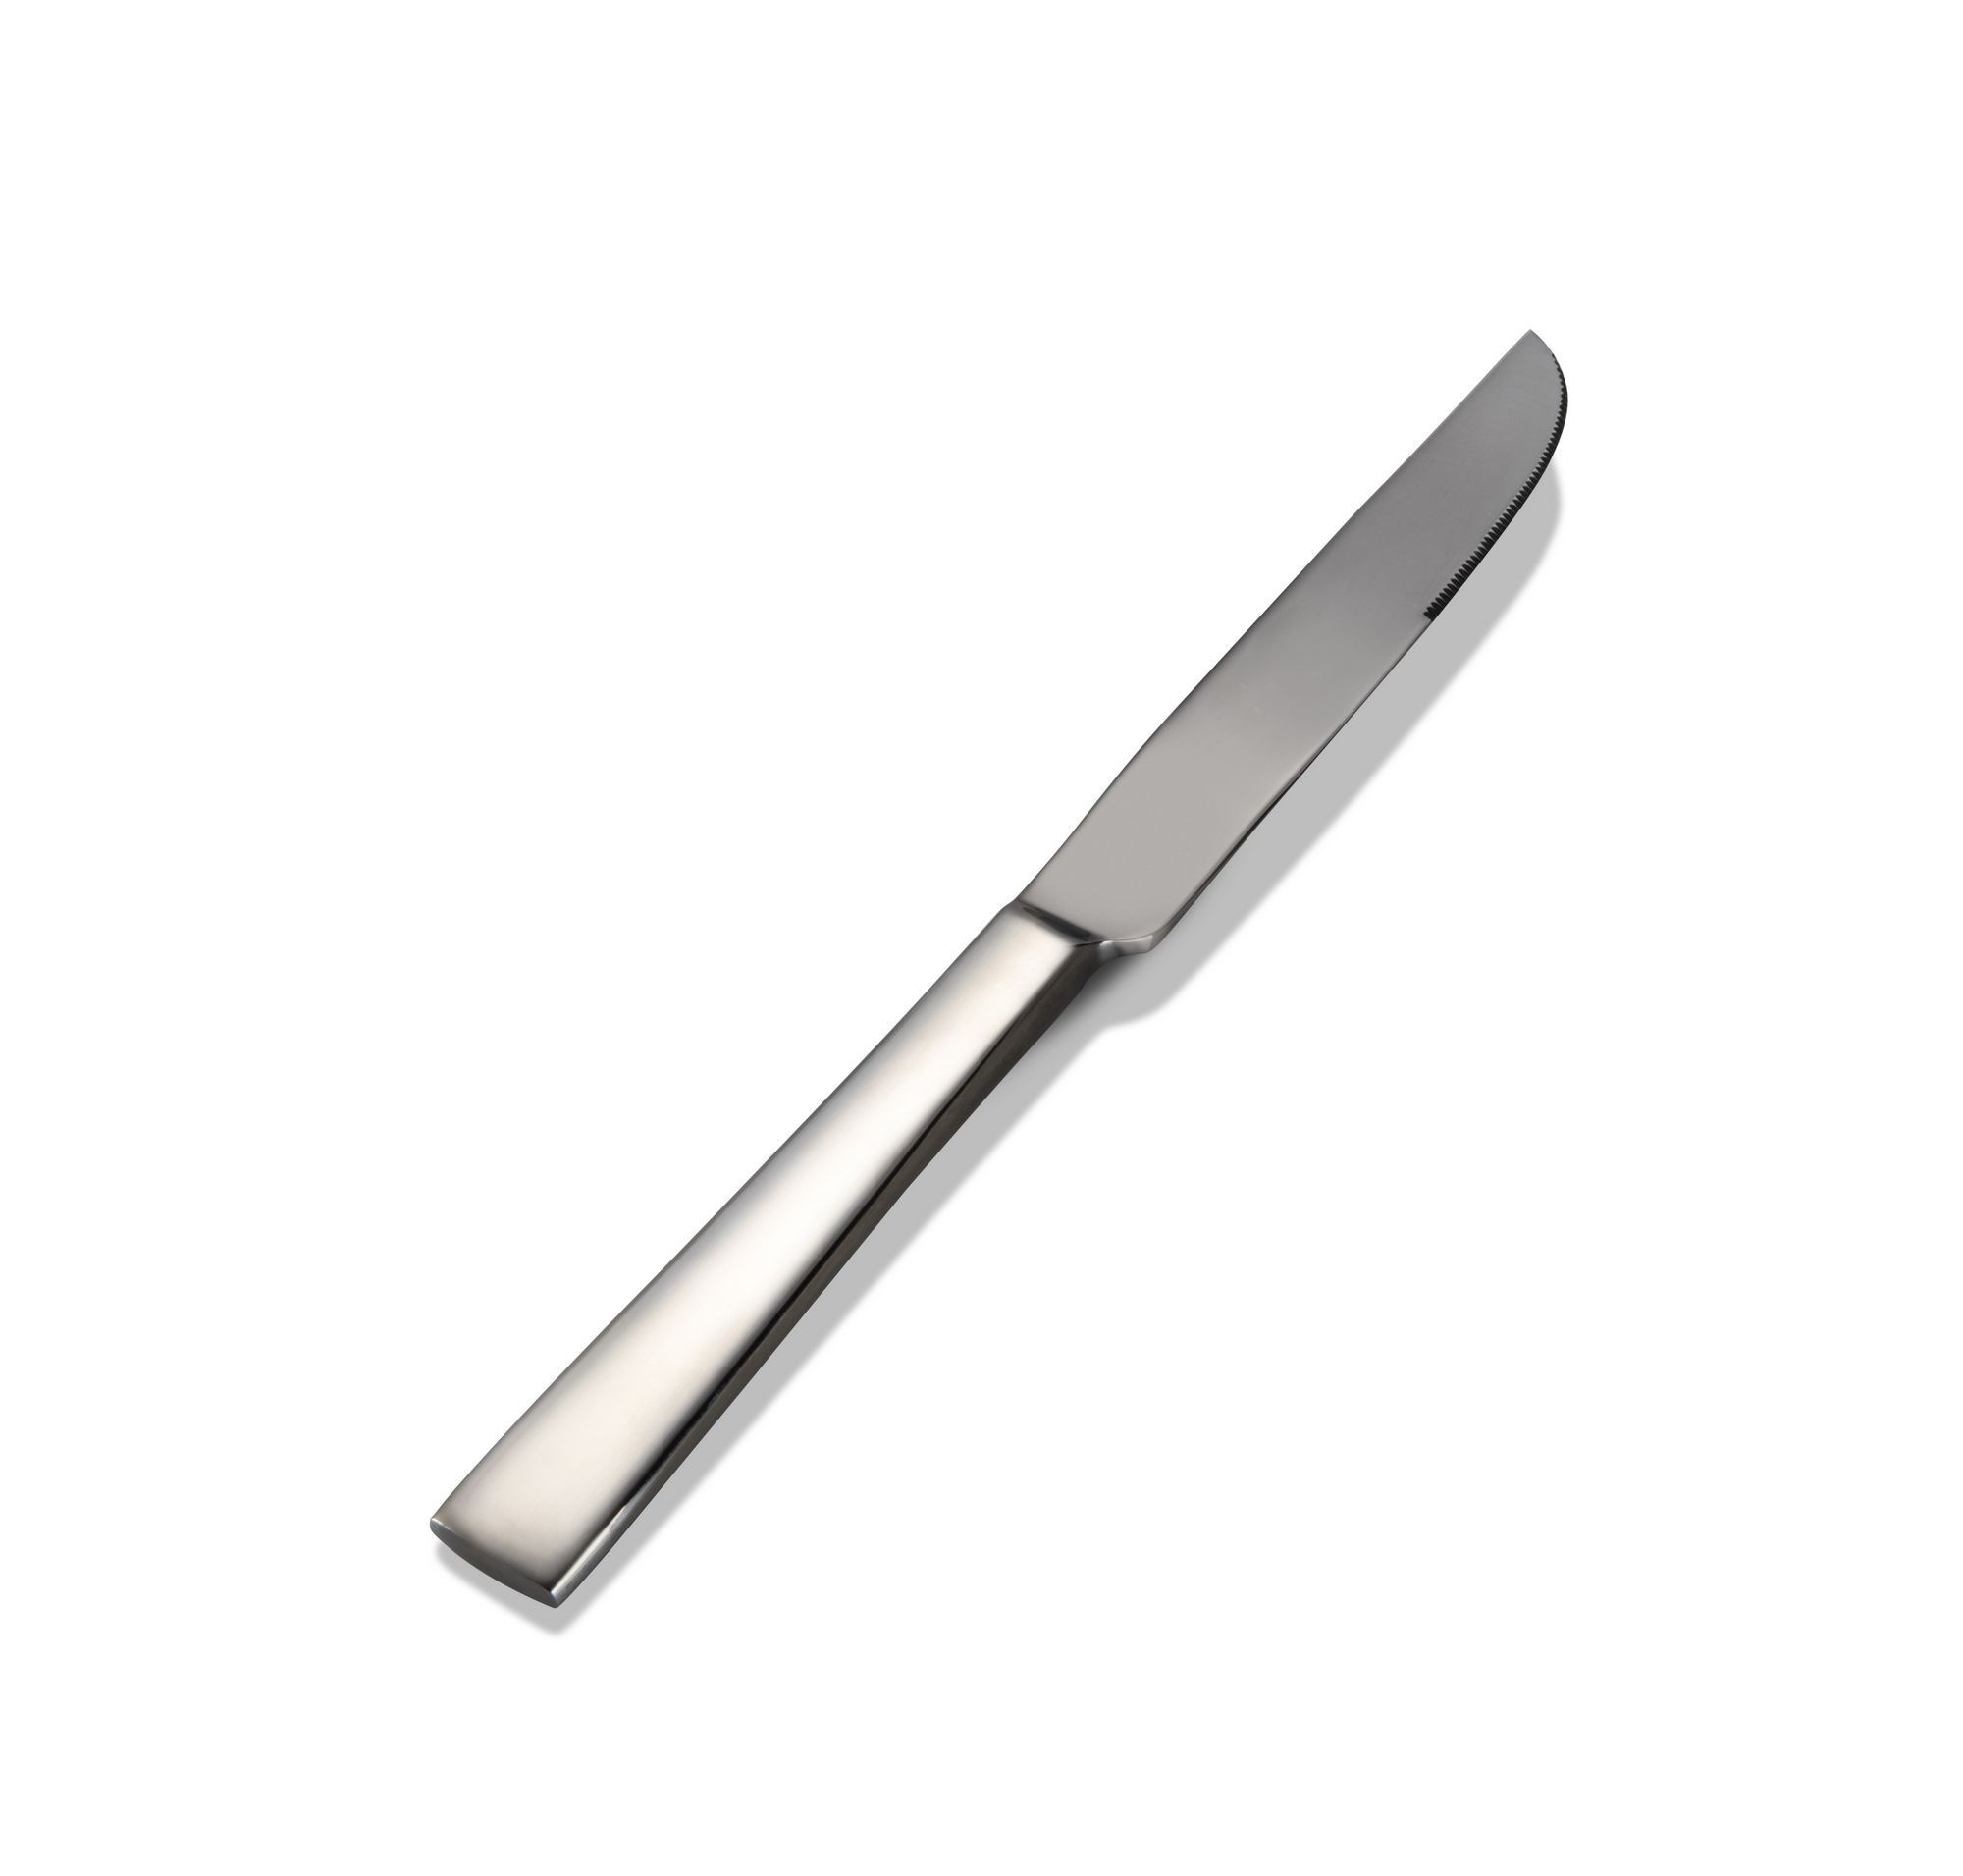 Bon Chef S3712S Roman 18/8 Stainless Steel Silverplated European Solid Handle Dinner Knife